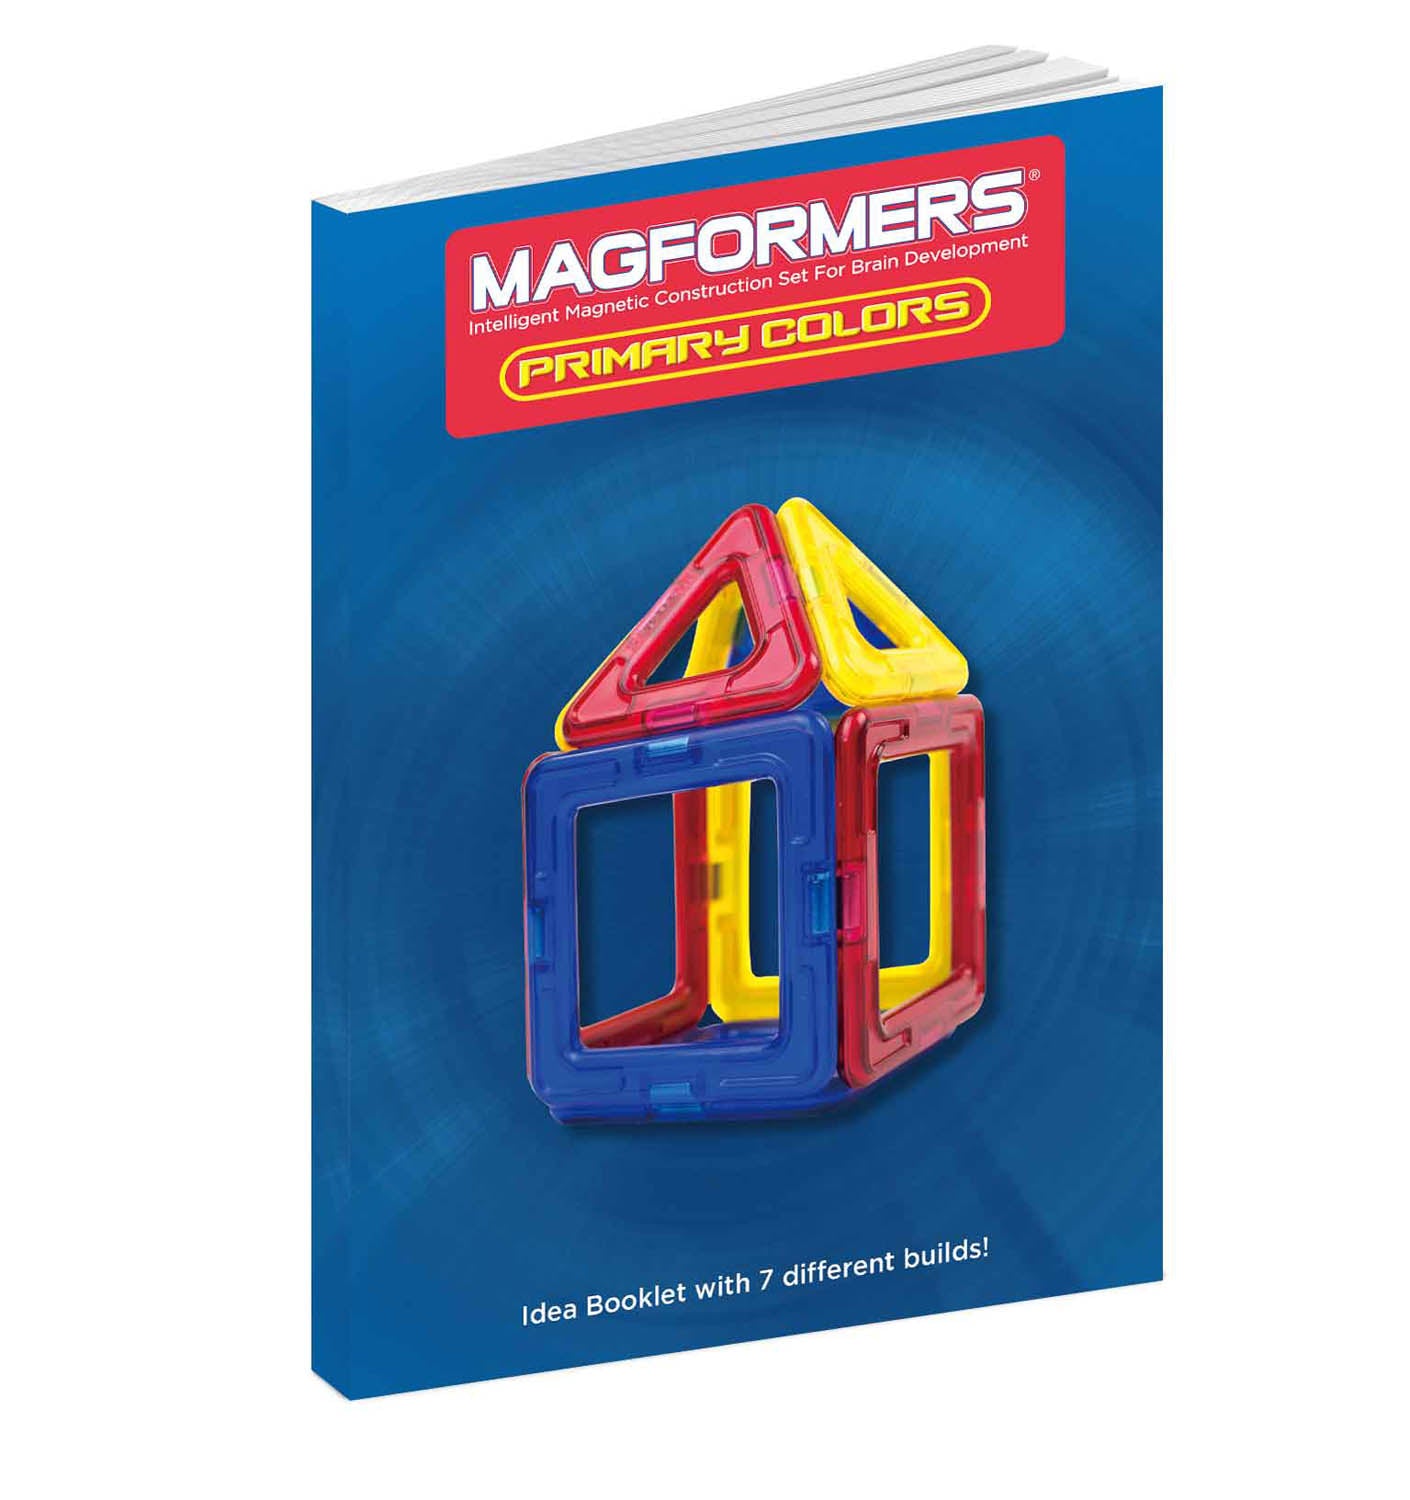 Magformers Primary Color 14Pc Magnetic Toy – Construction Magformers Educational STEM US